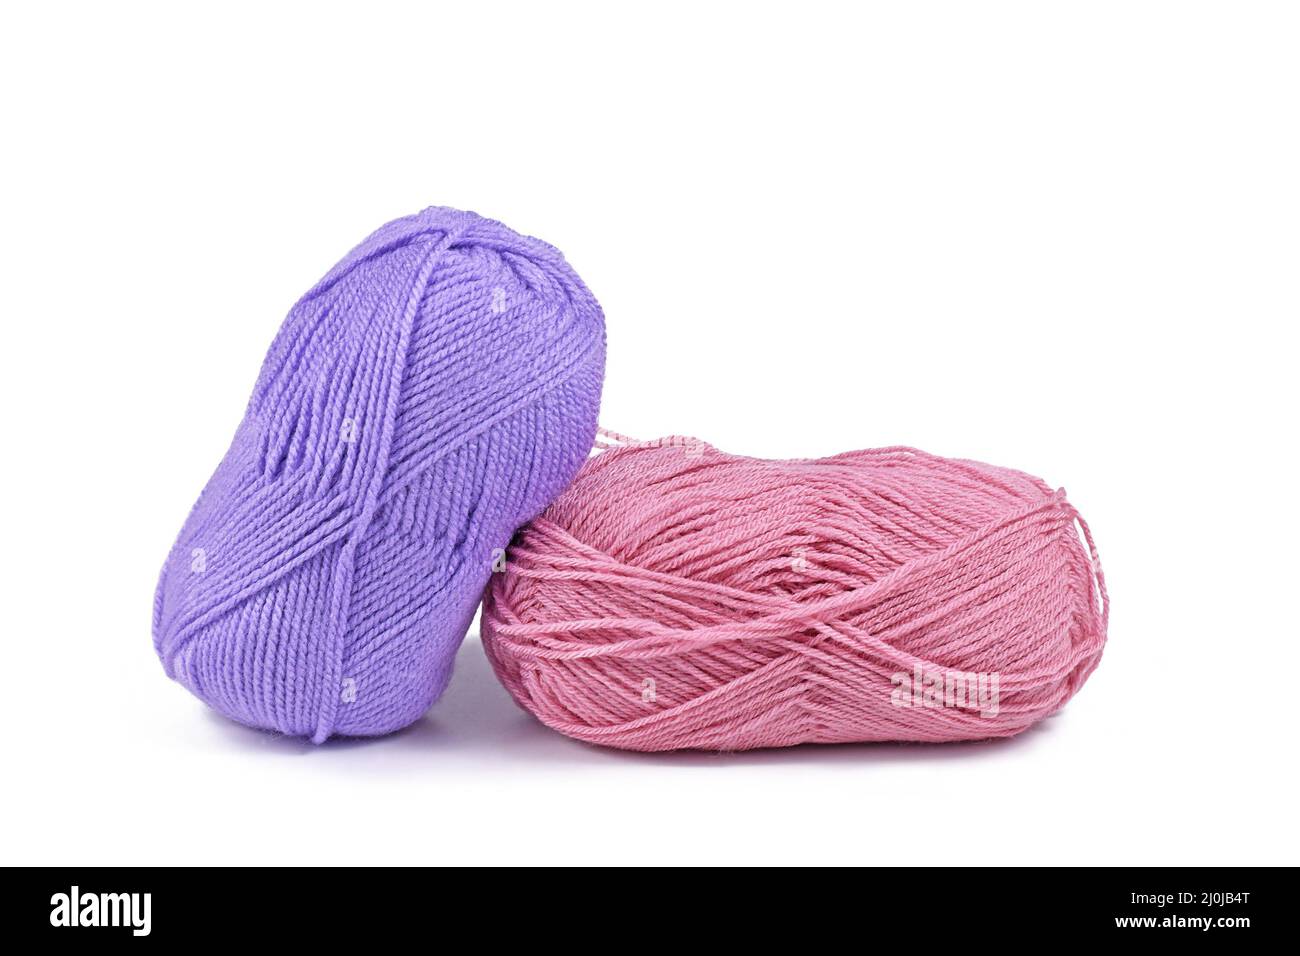 Balls of pink and purple wool on white background Stock Photo